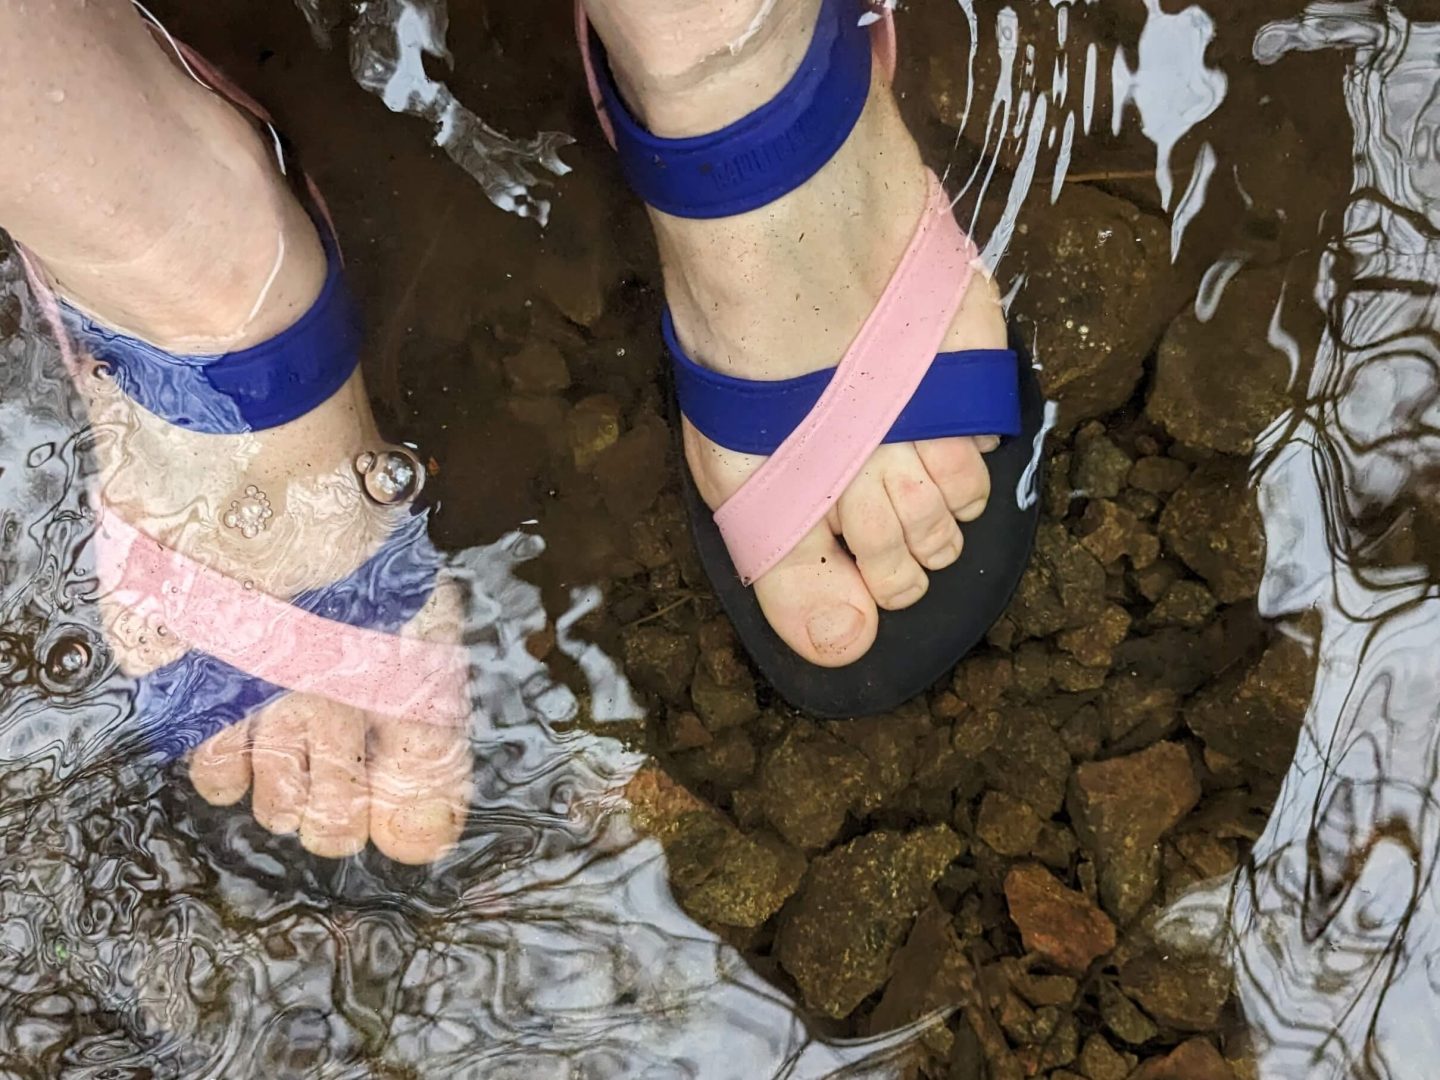 Female feet wearing pink and blue MOO CHUU sandals satnding in water